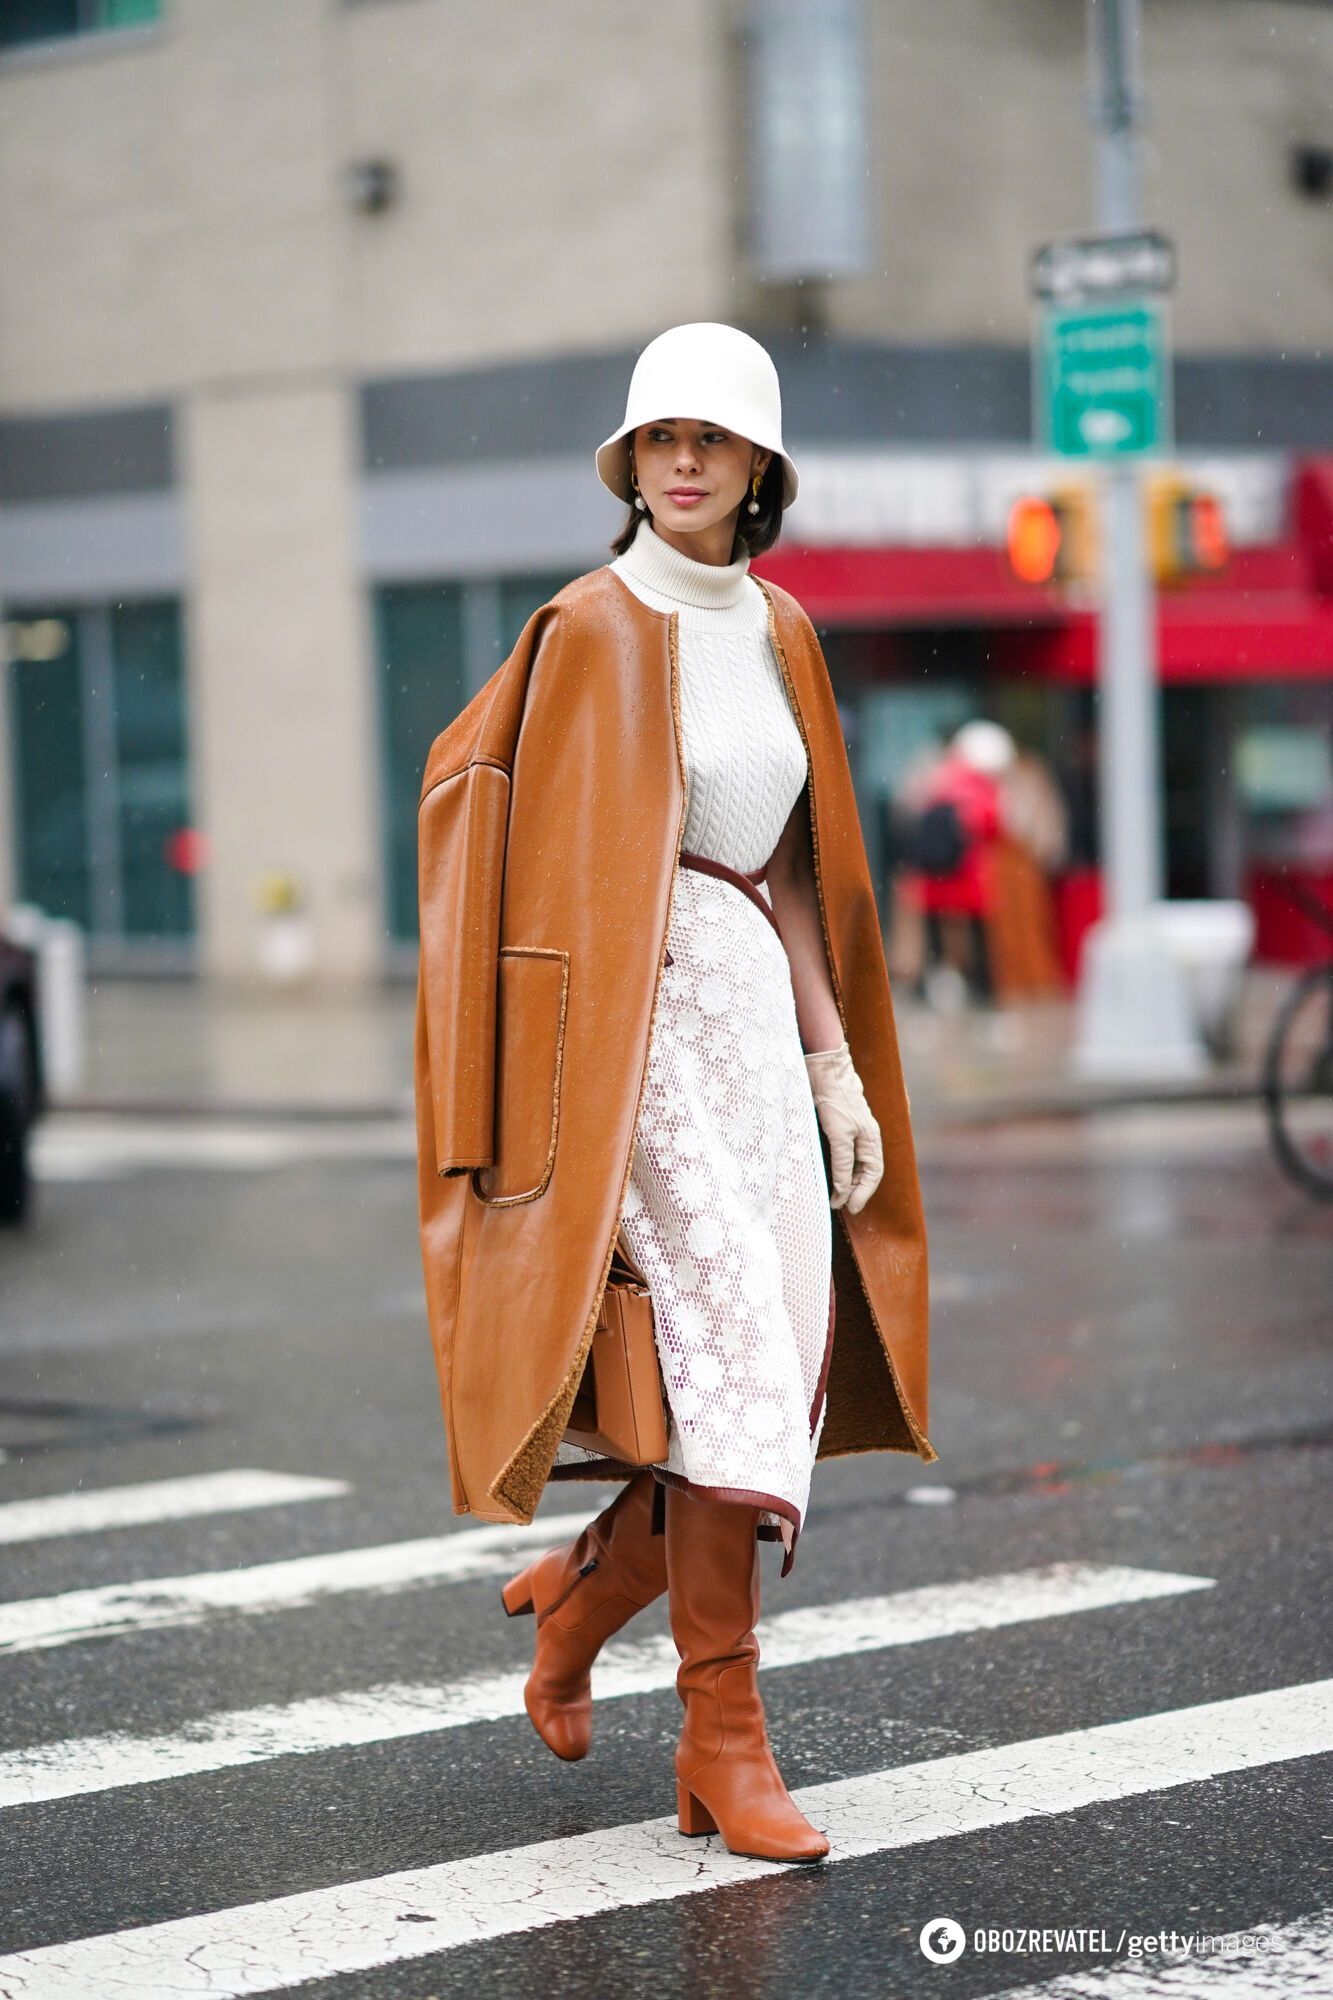 Forget about them: 5 winter items that are long out of fashion and should be replaced with new ones